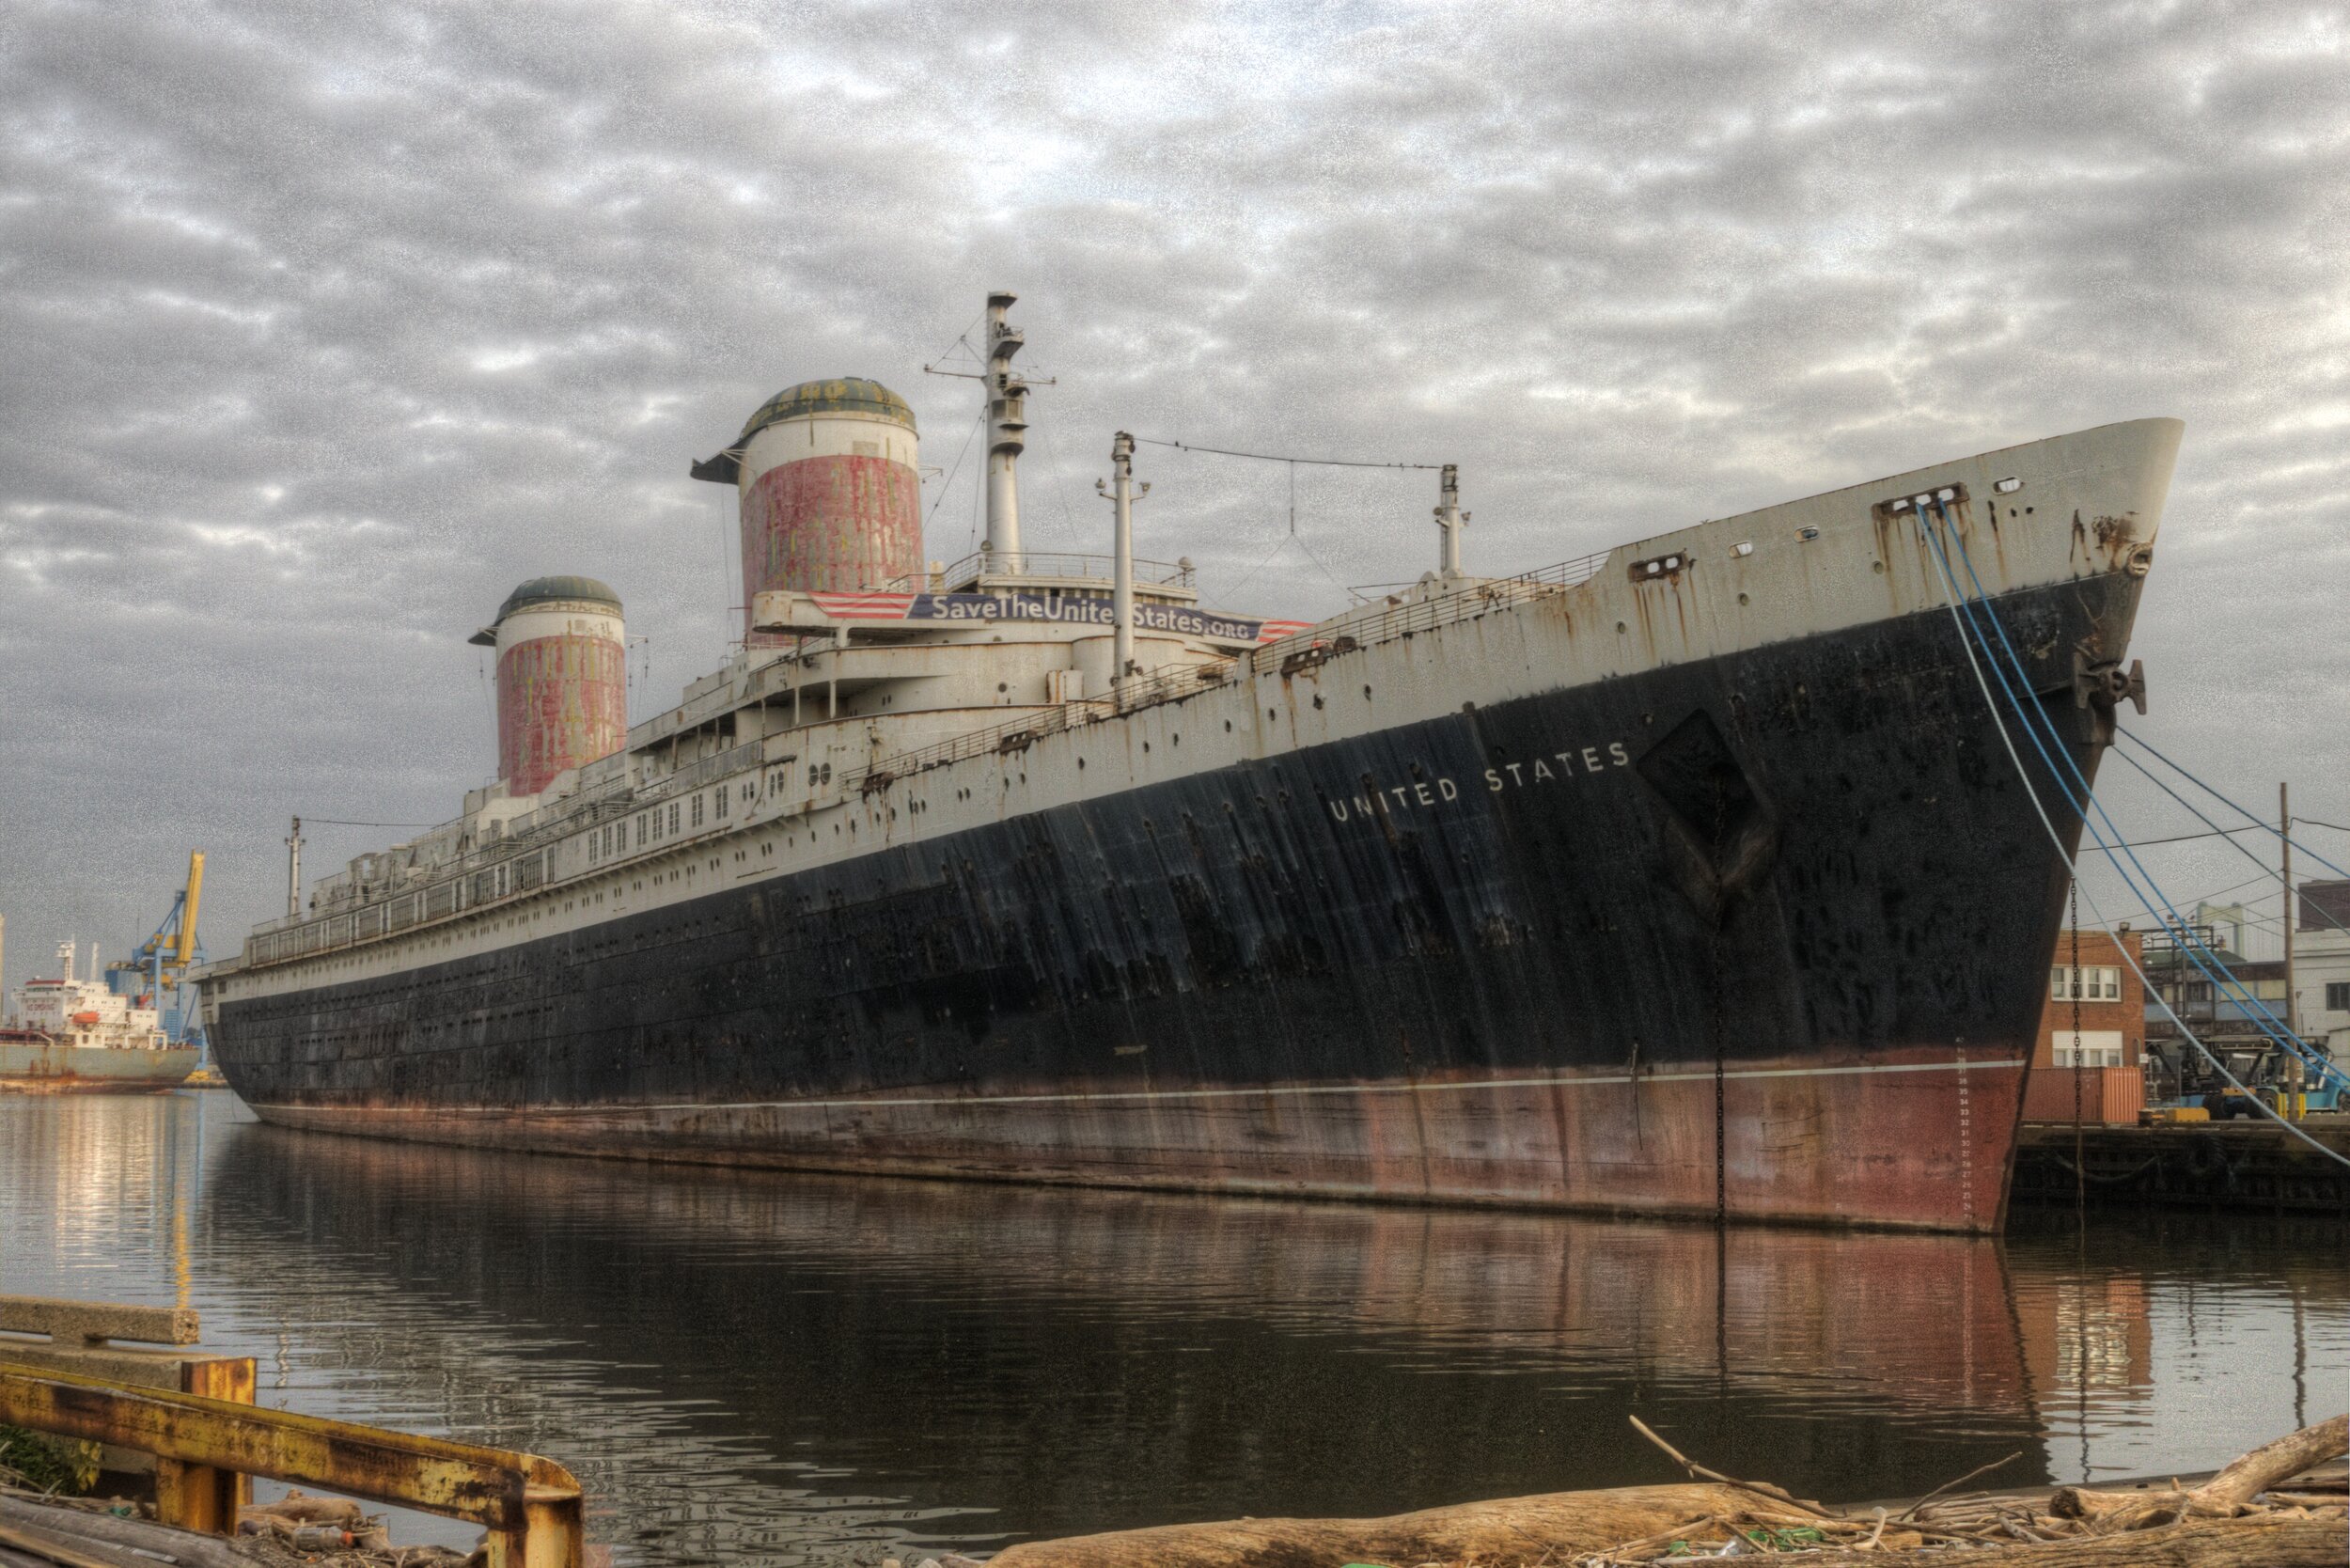 The SS United States at her dock in Philadelphia